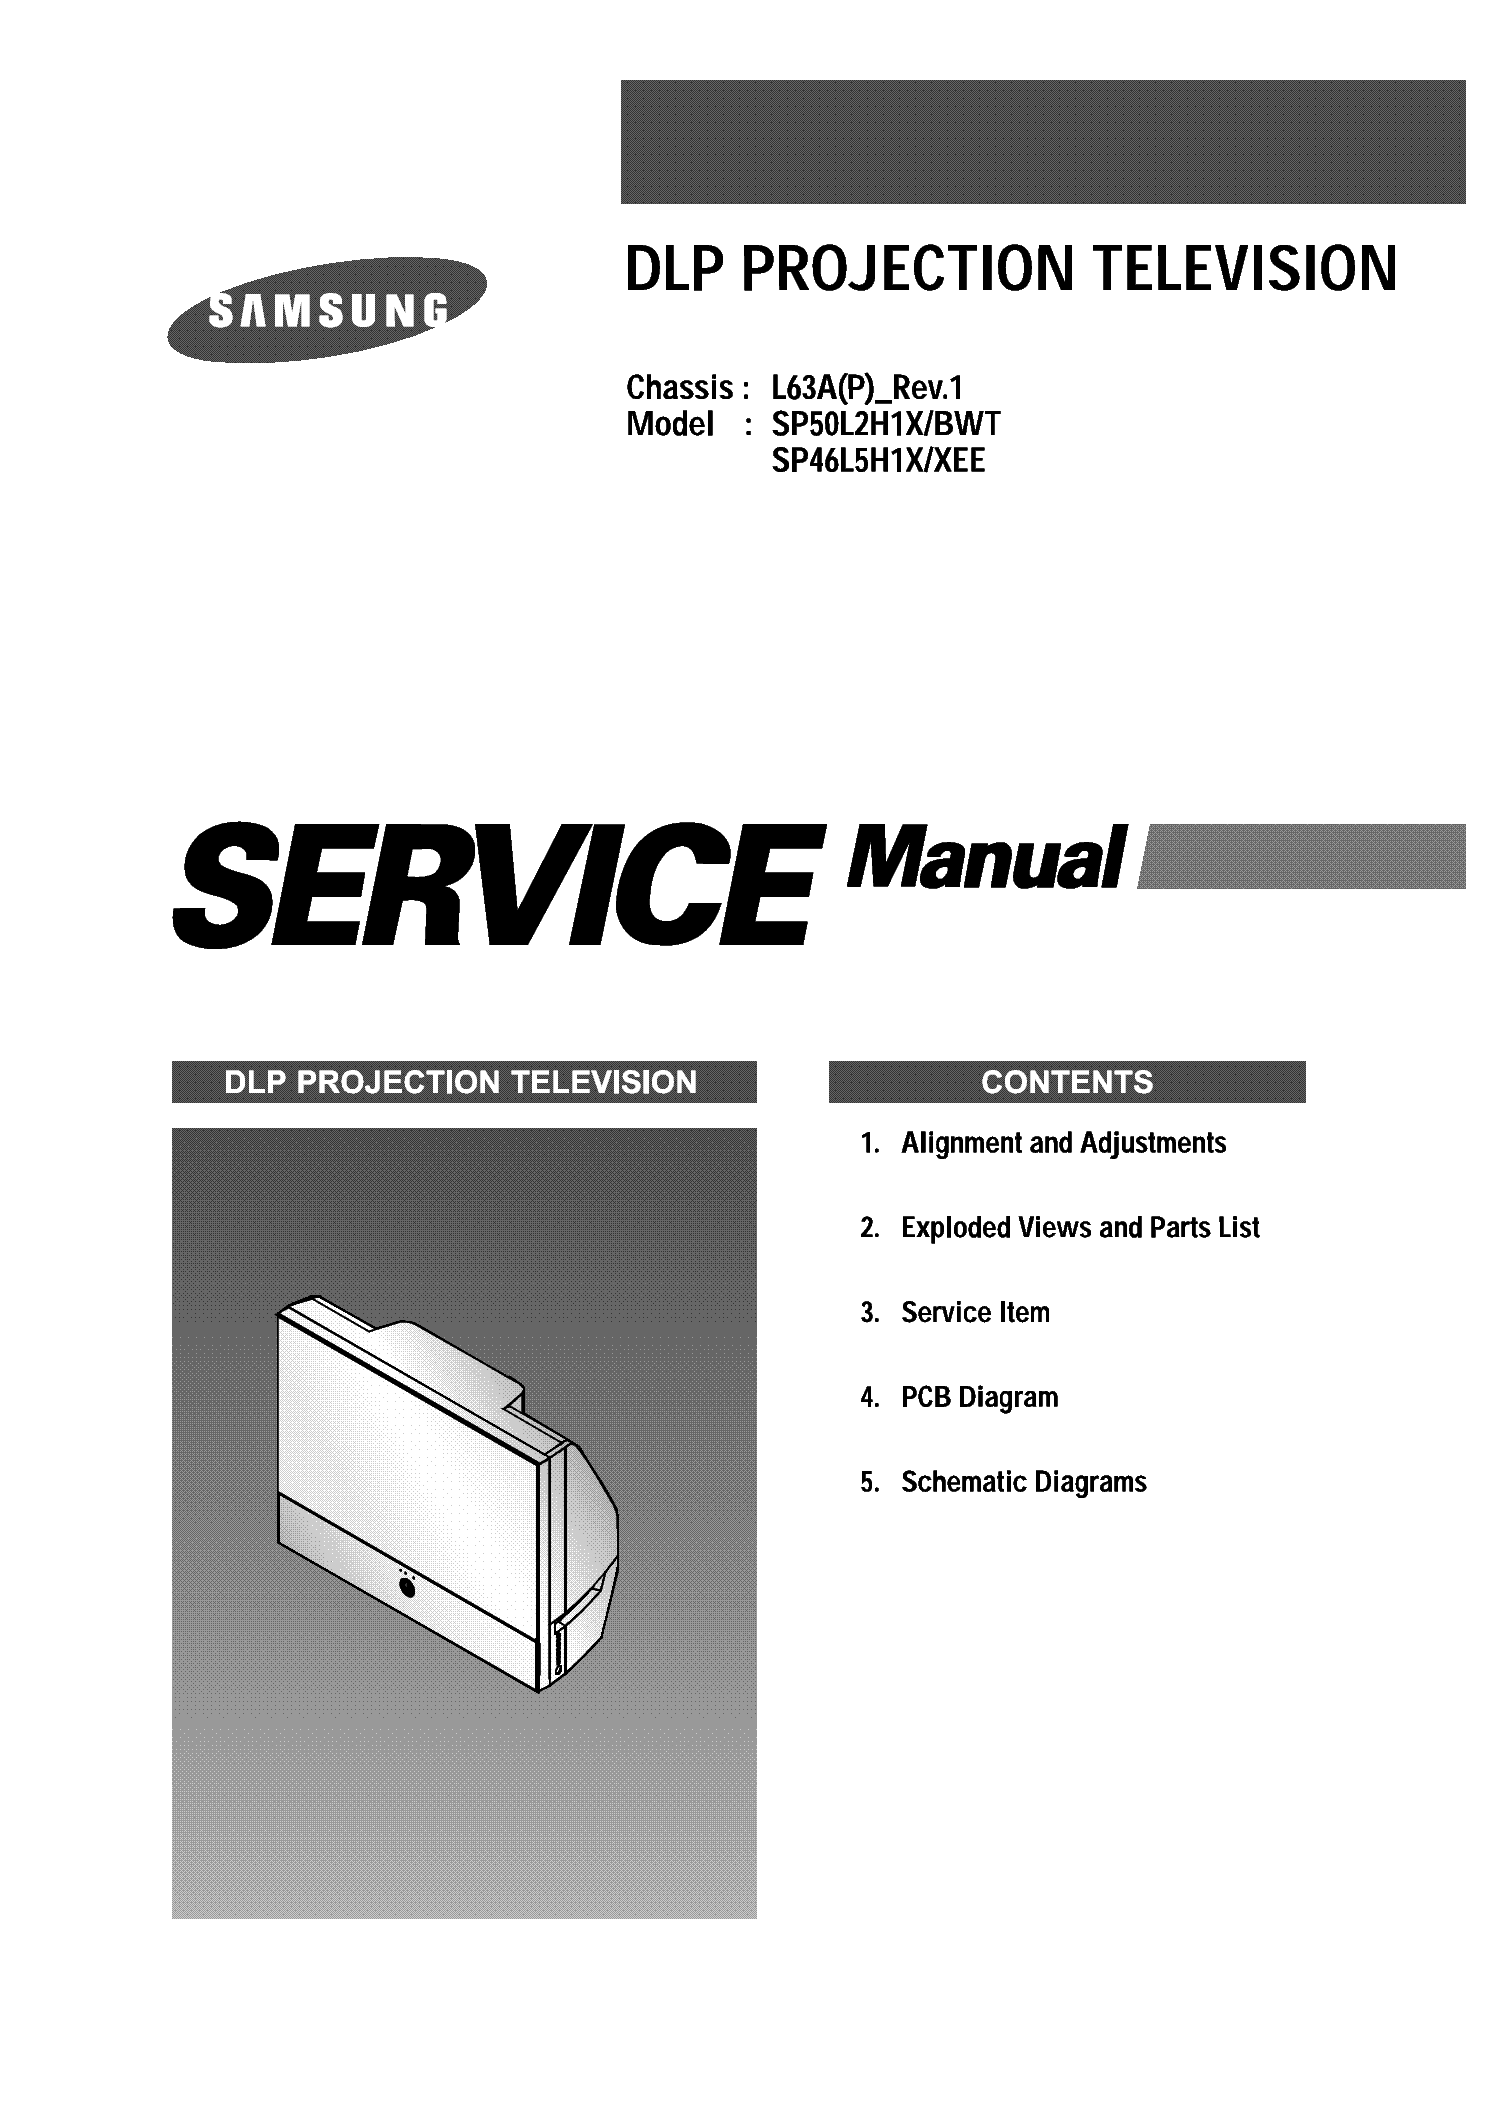 SAMSUNG SP50L2H1X SP46L5H1X CHASSIS L63A service manual (1st page)